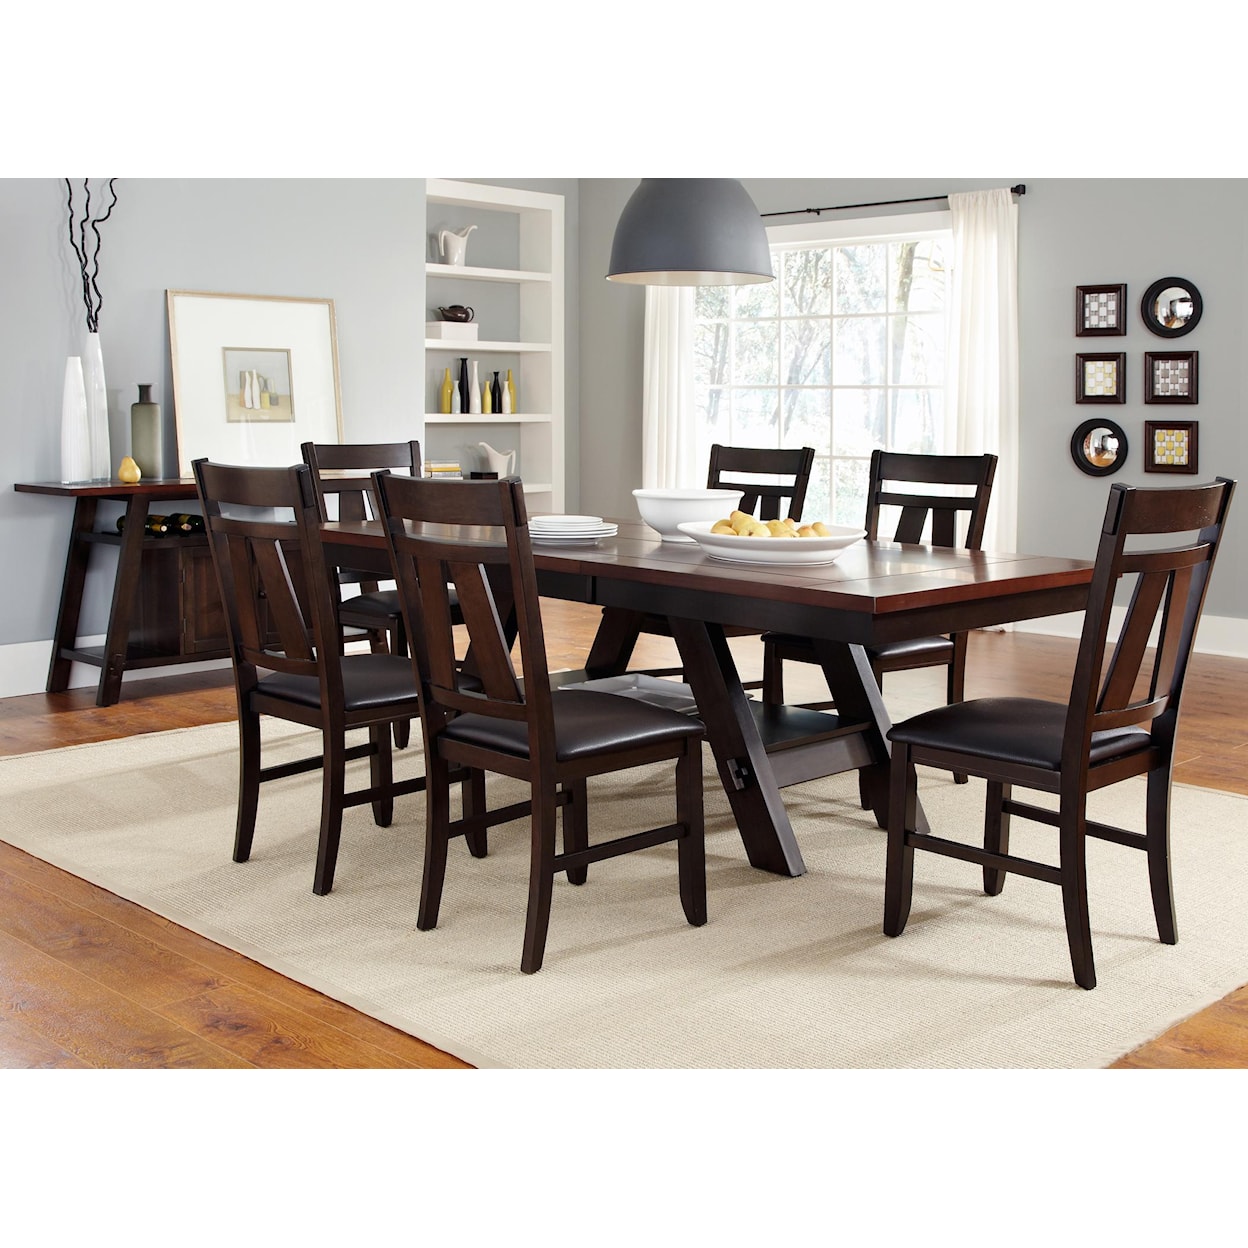 Liberty Furniture Lawson Formal Dining Room Group